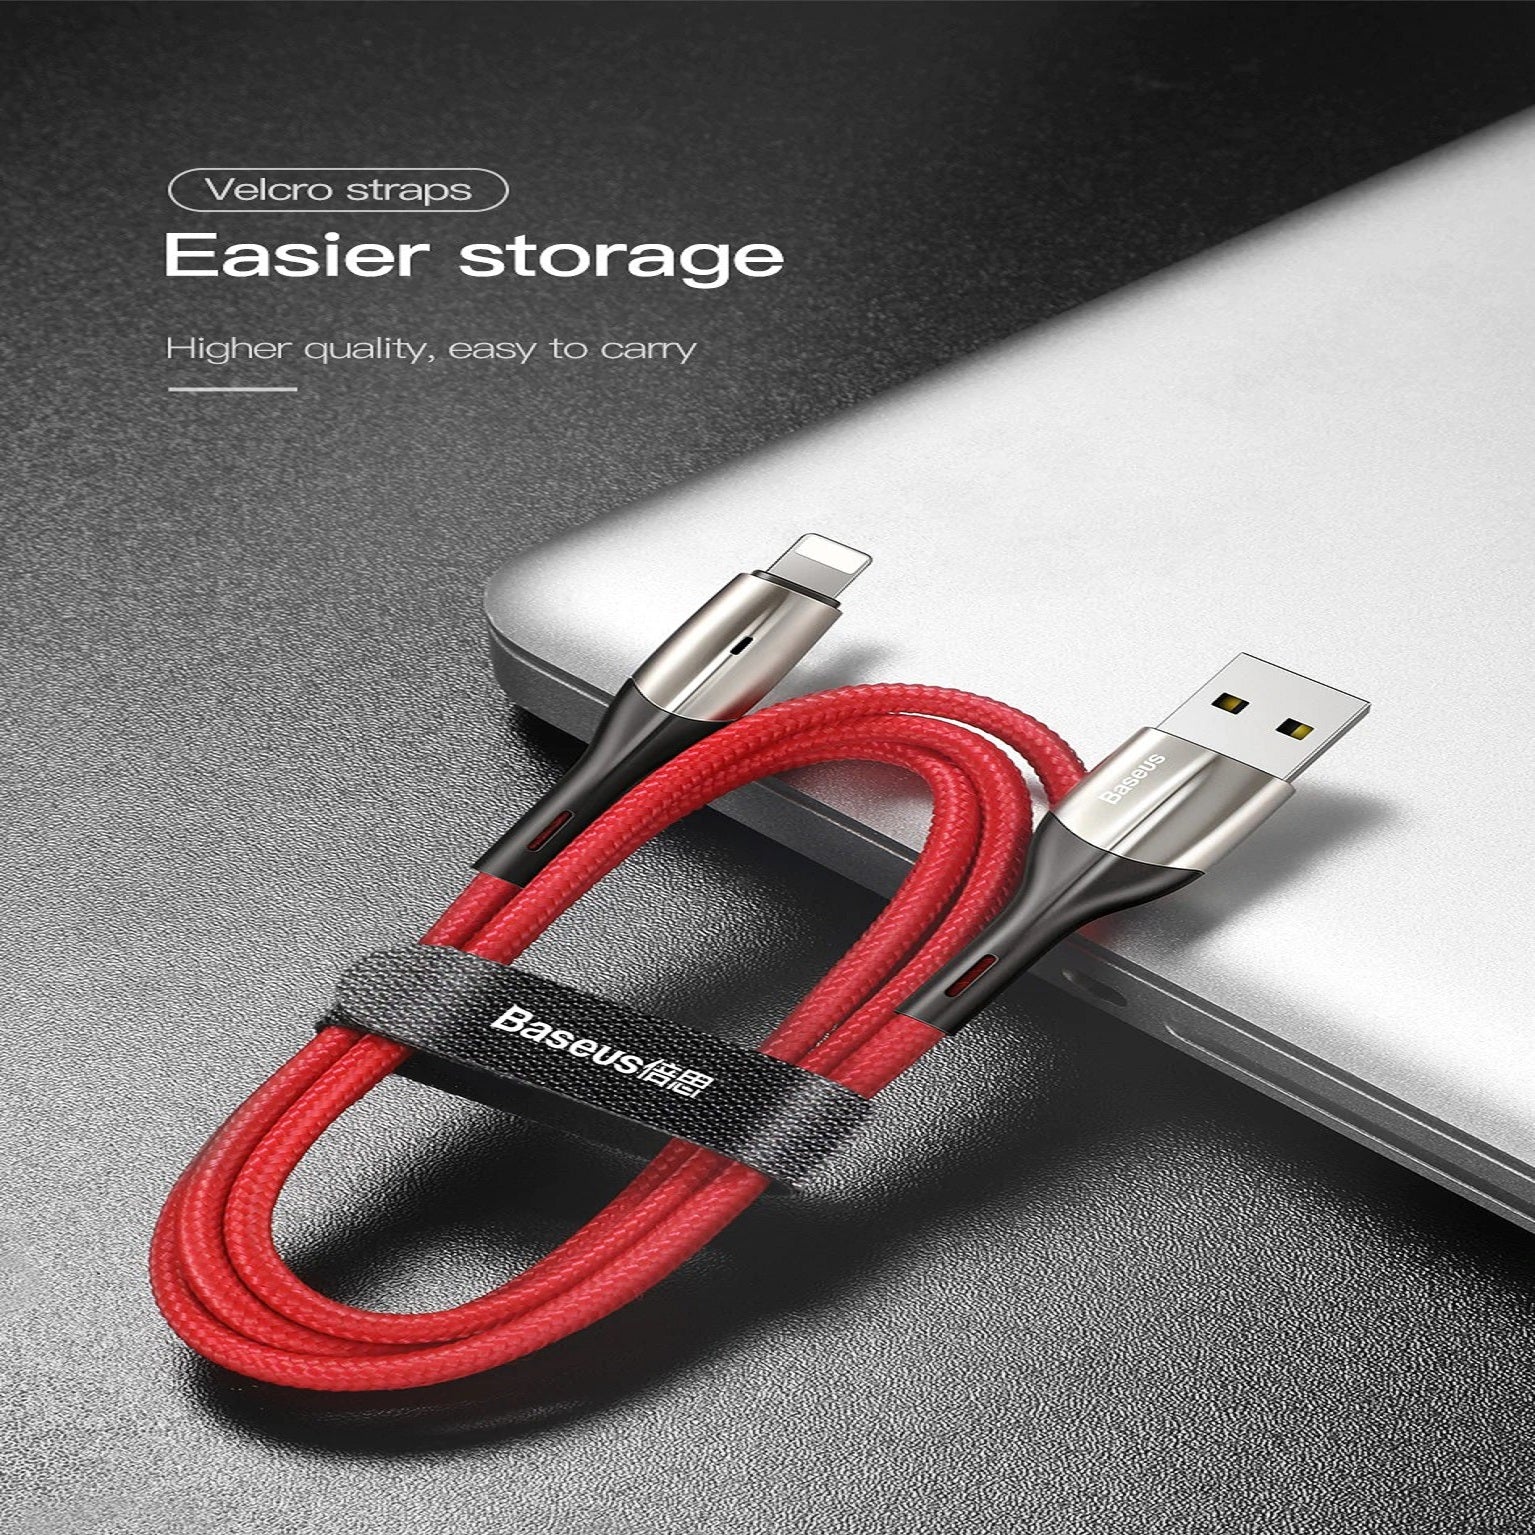 Baseus 2.4A Fast Charging Lightning USB Data Cable cum Charging Cable for iPhone